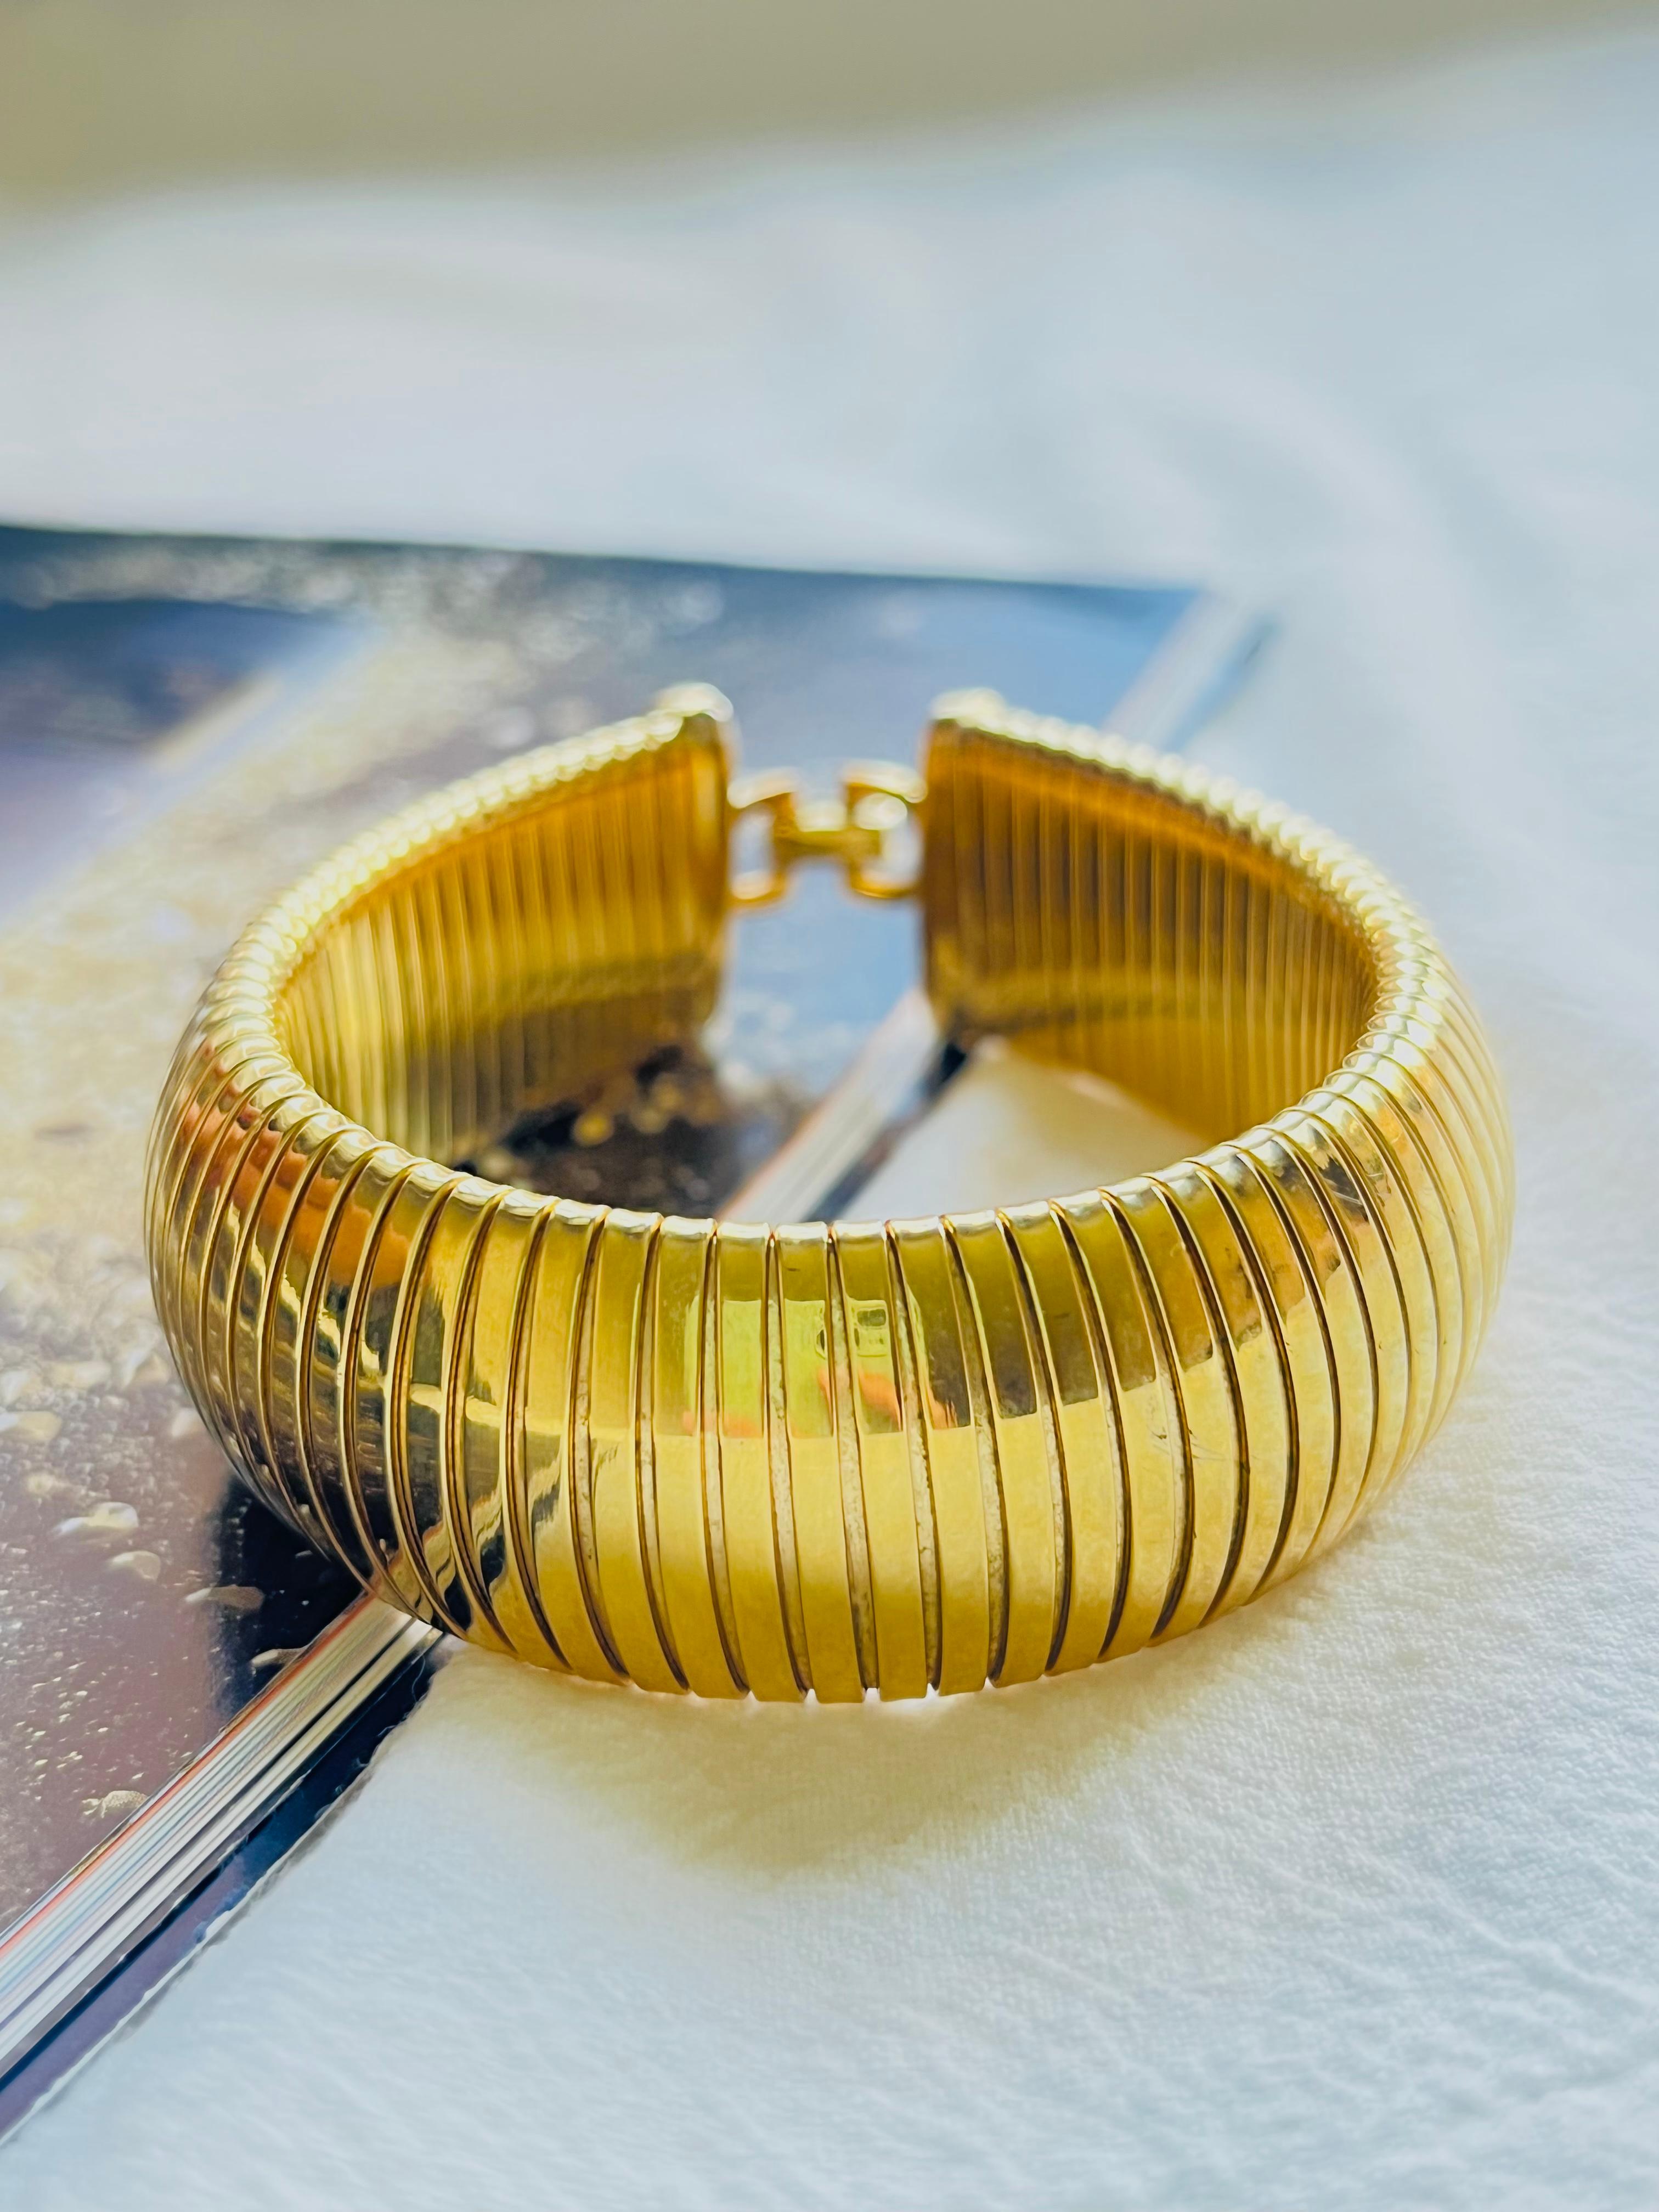 Christian Dior Vintage 1980s Unisex Extra Wide Ribbed Omega Snake Cuff Bracelet, Gold Tone

Very good condition. Light scratches or colour loss, barely noticeable. 100% Genuine.

Crafted from polished gold plated with a circular design, this